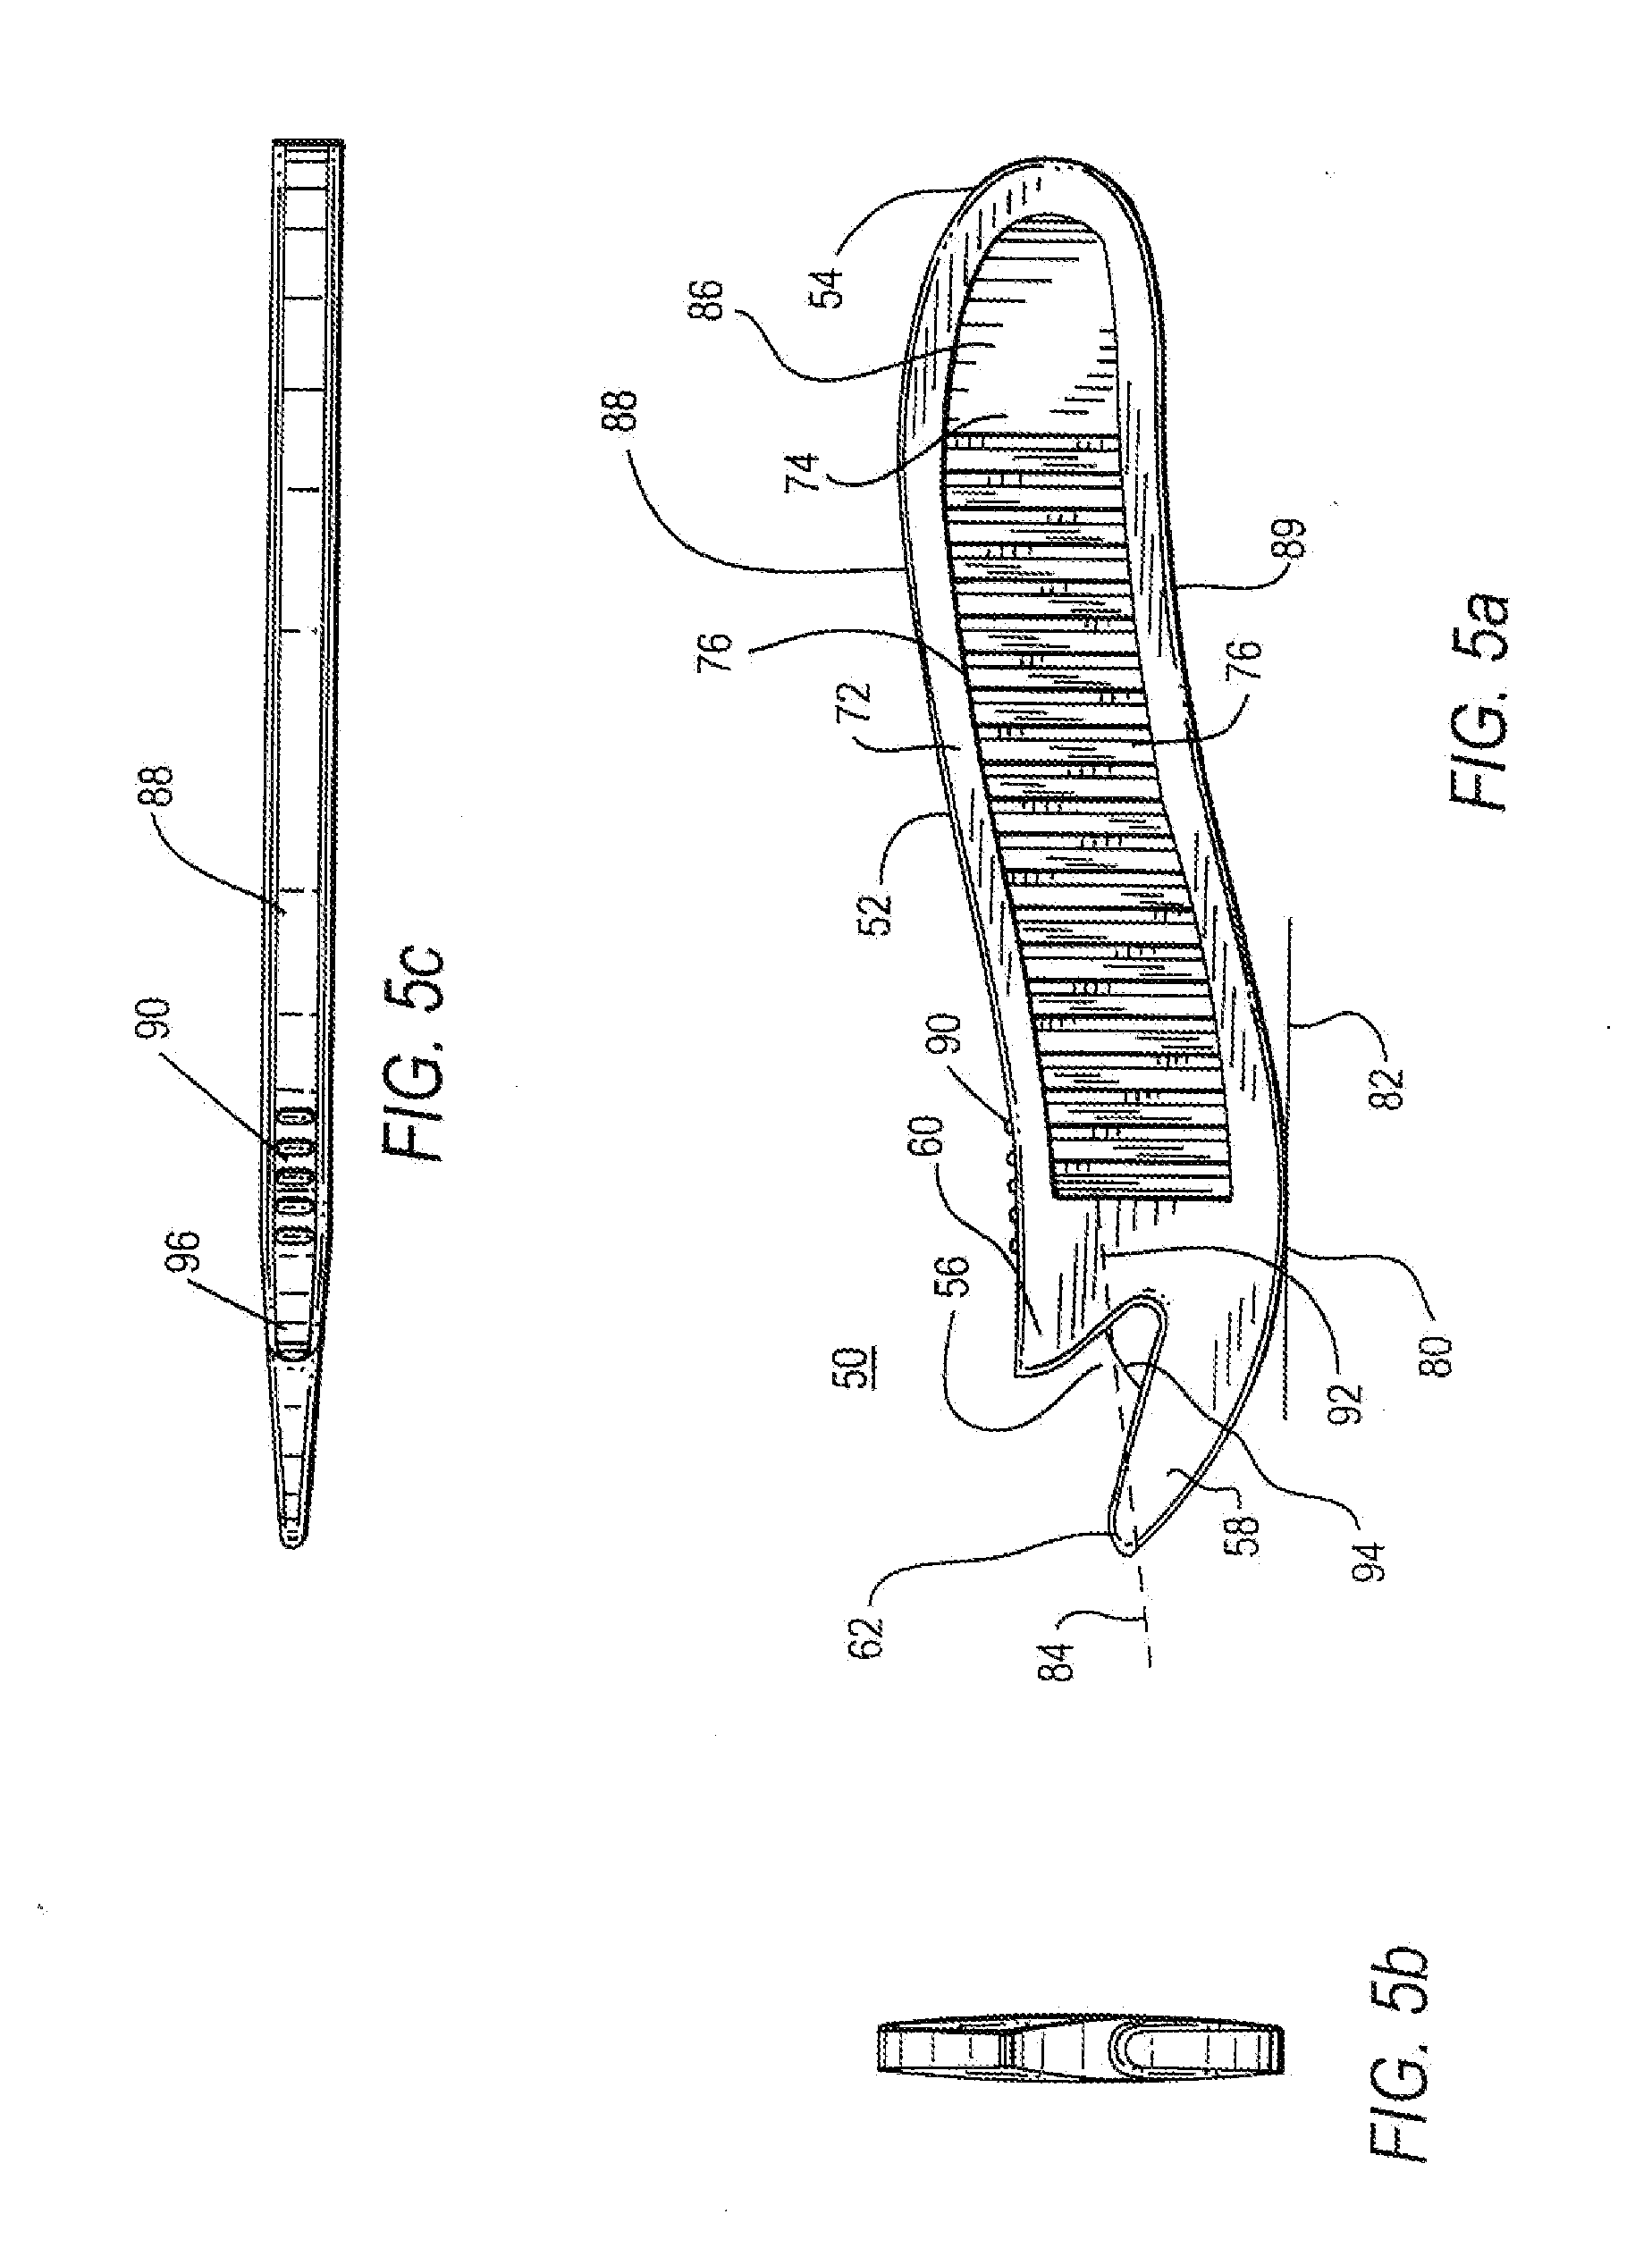 Two-part surgical device